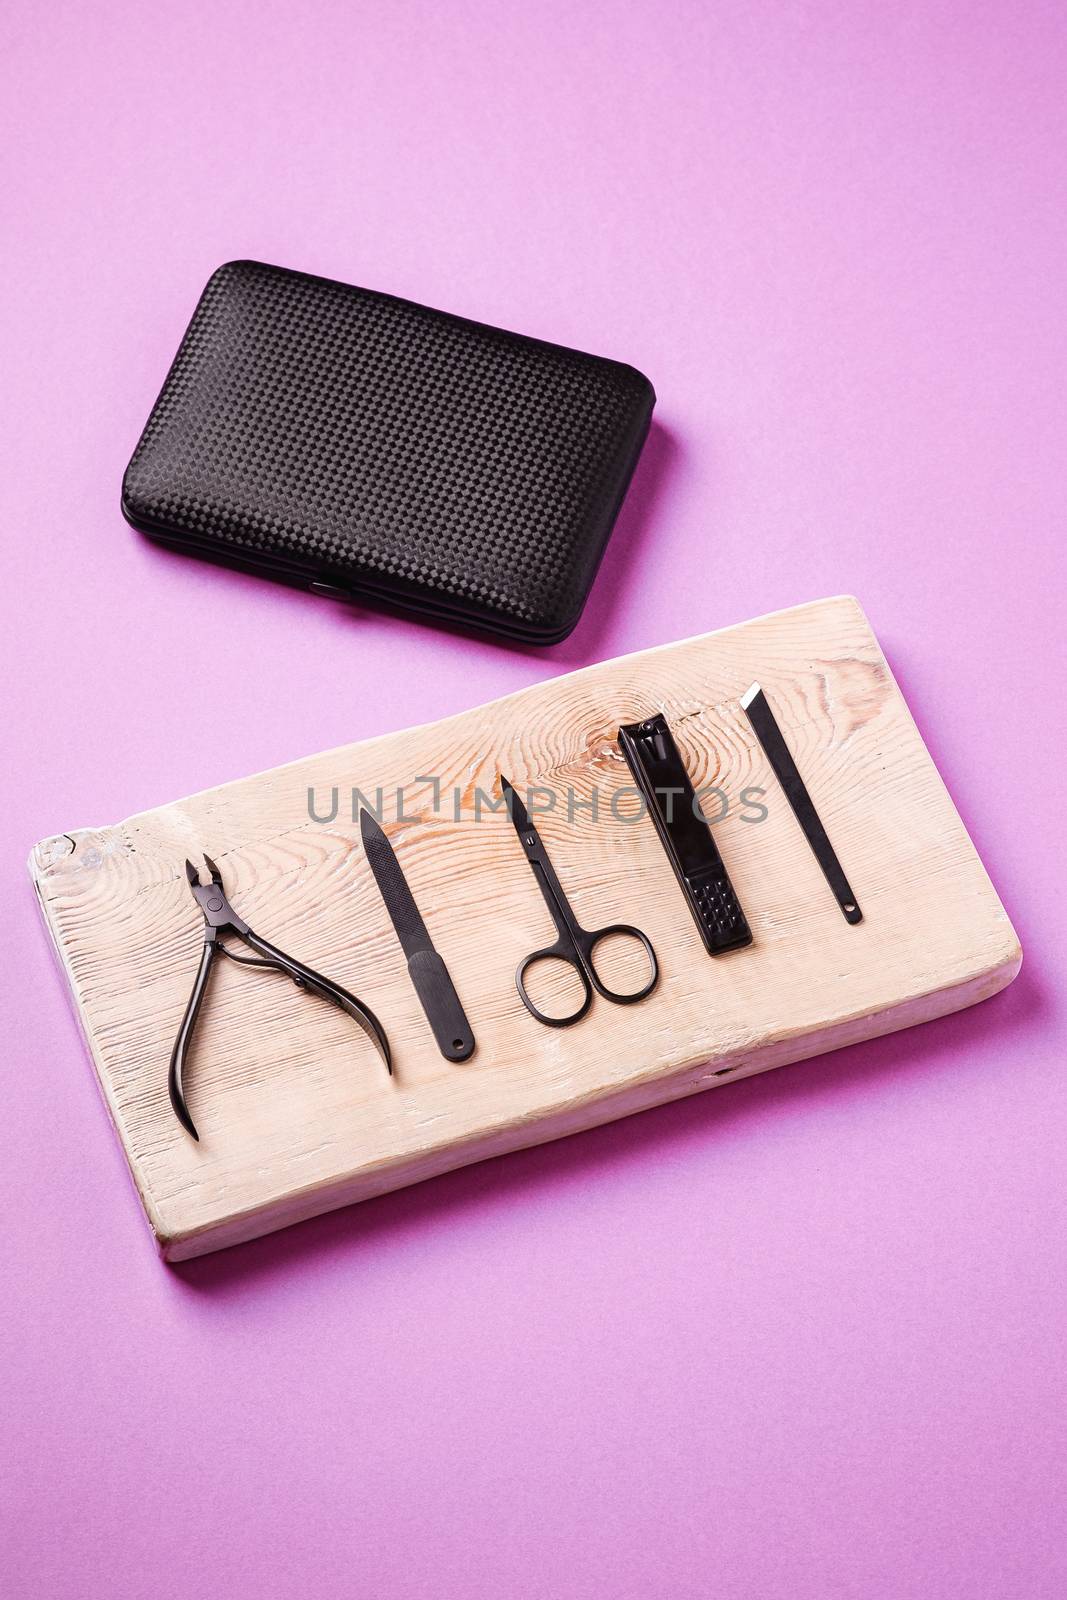 Set of manicure and pedicure tools and accessories on wooden board near to black case, angle view, pink background